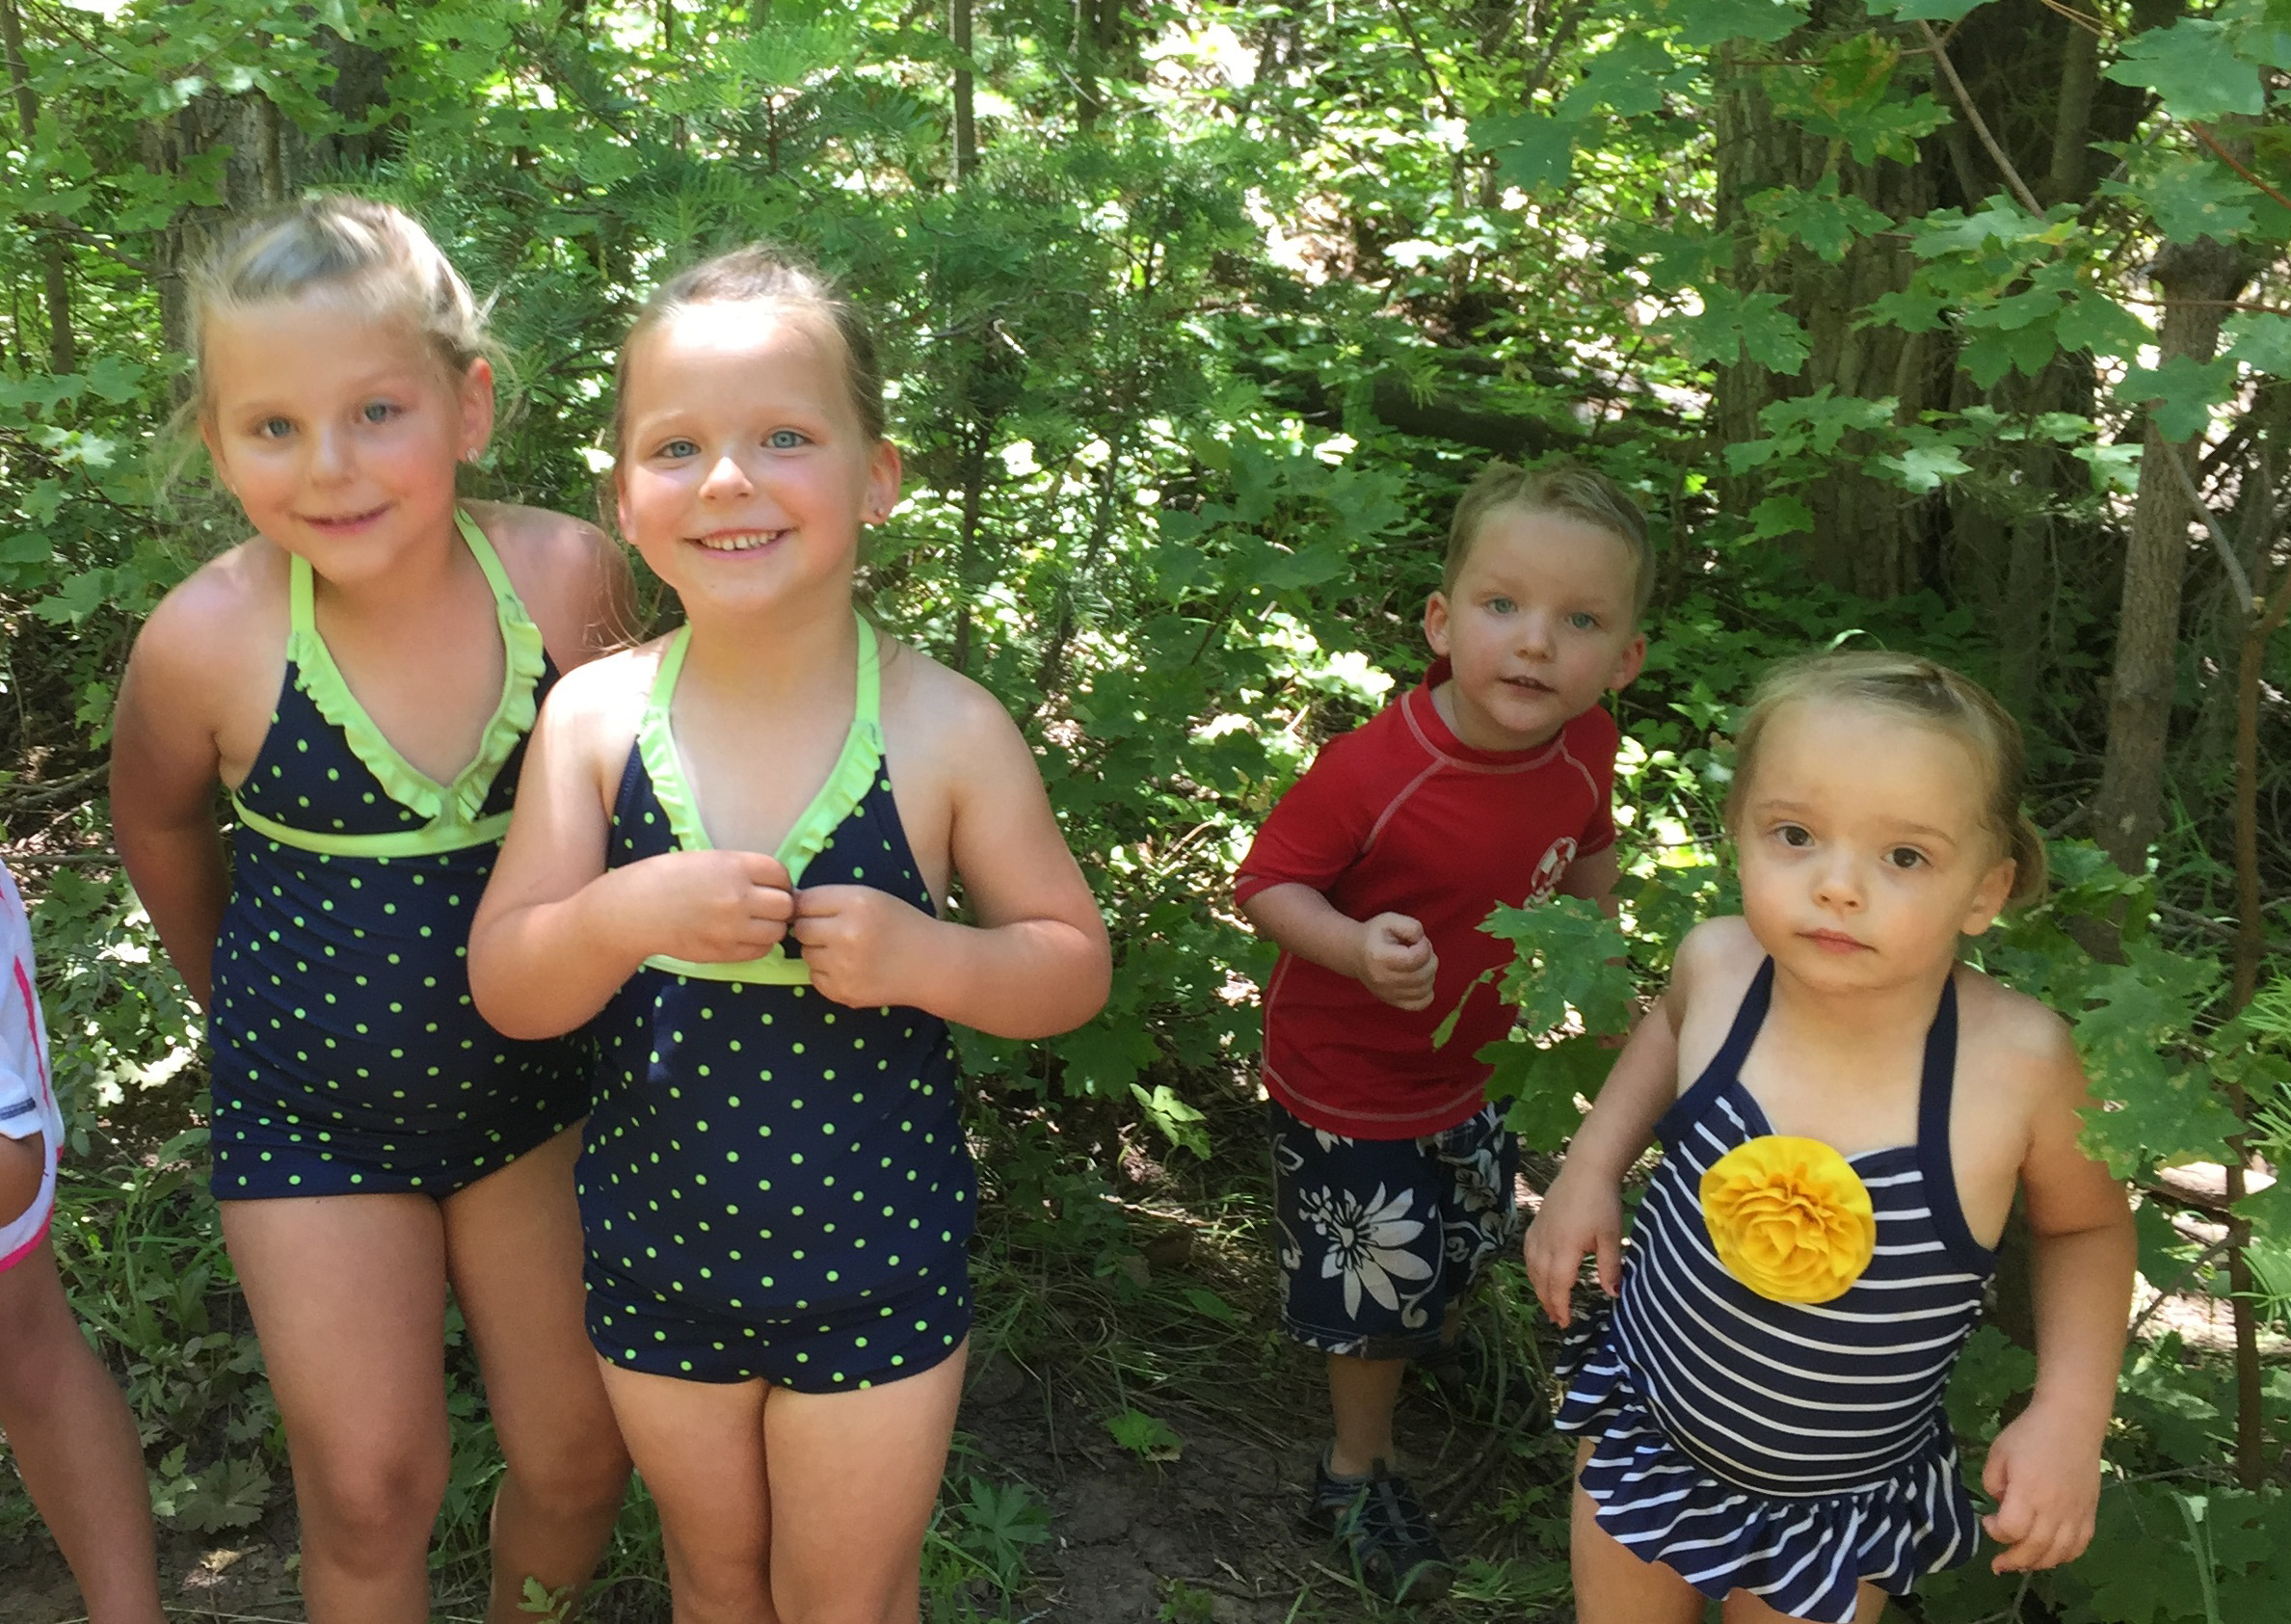 PHOTO: Madison, McKell, Kole, and Hallie are pictured in June 2015.